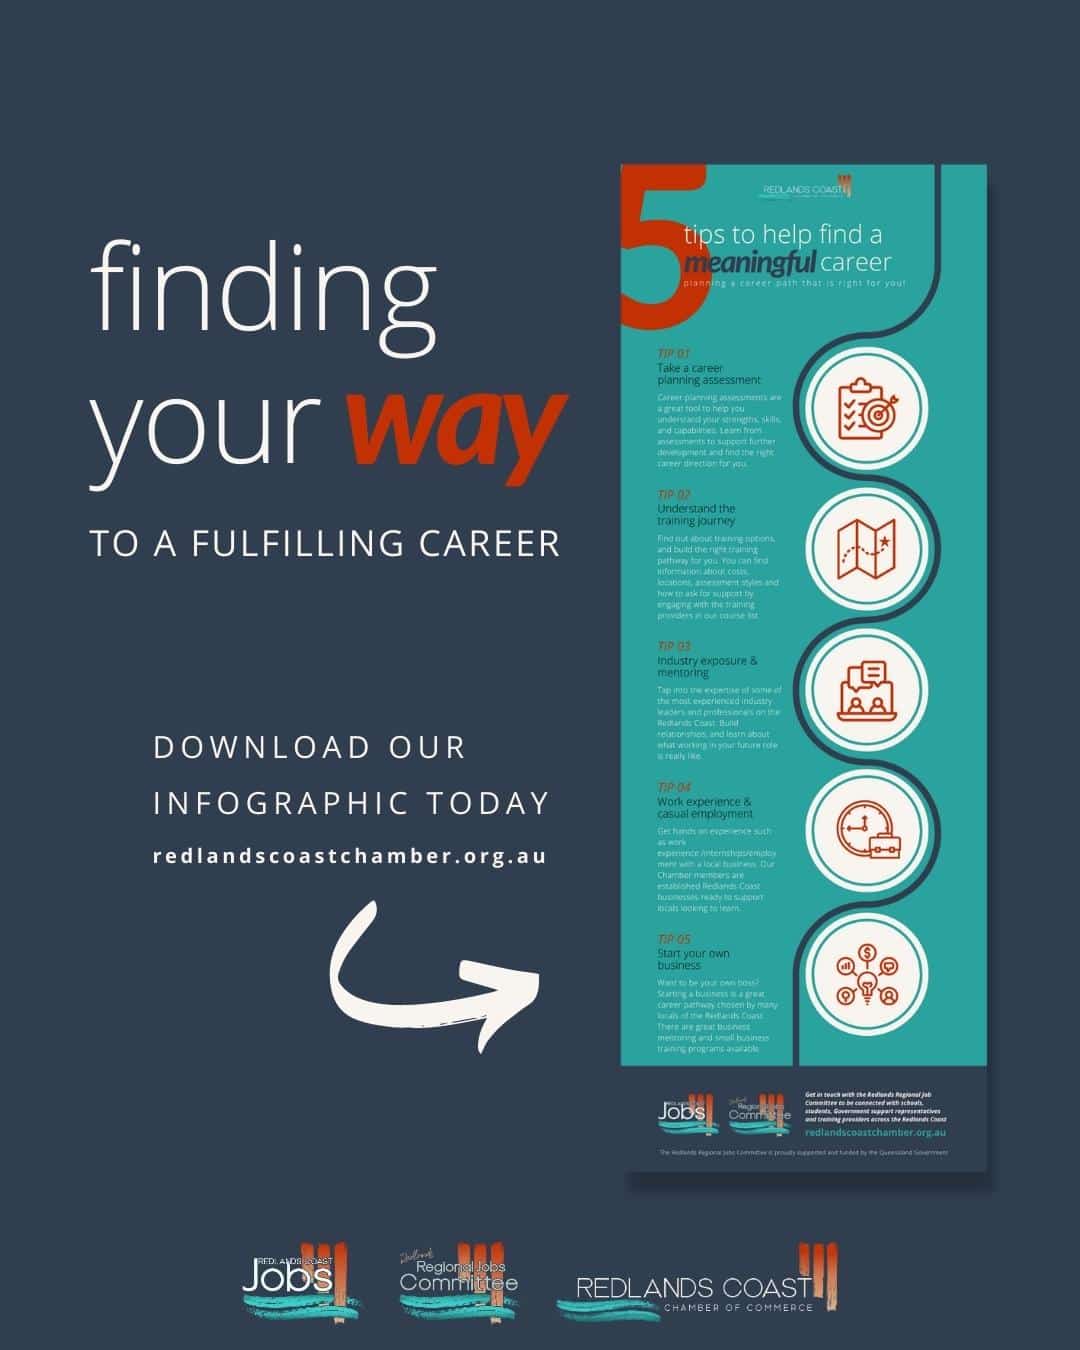 5 Tips to Help Find a Meaningful Career